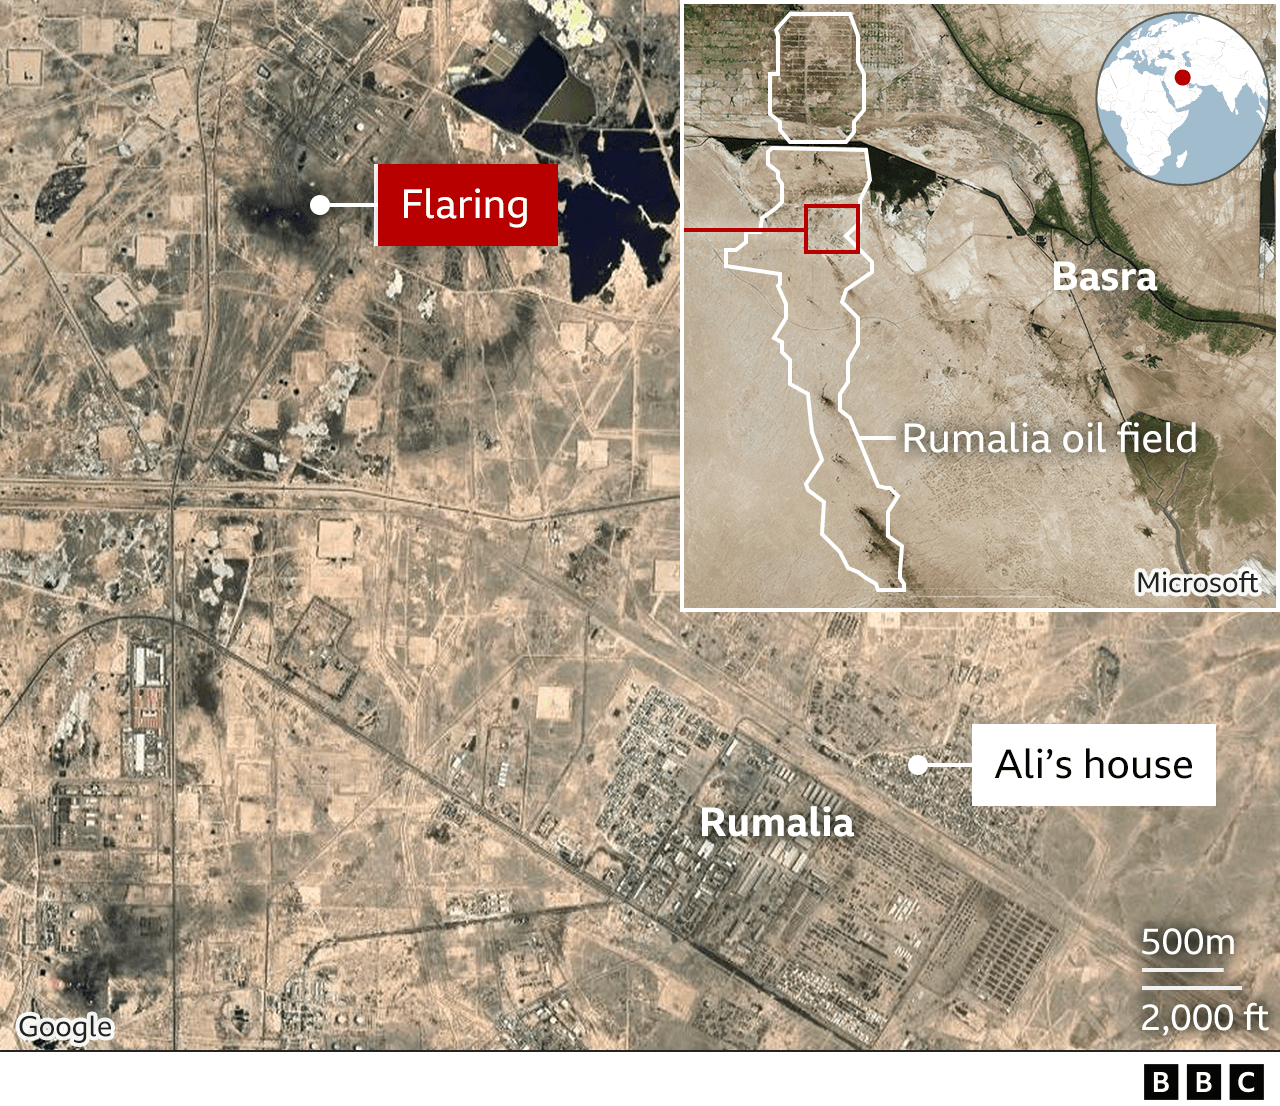 Map showing the location of Ali's house in relation to the flaring in Rumaila oil field